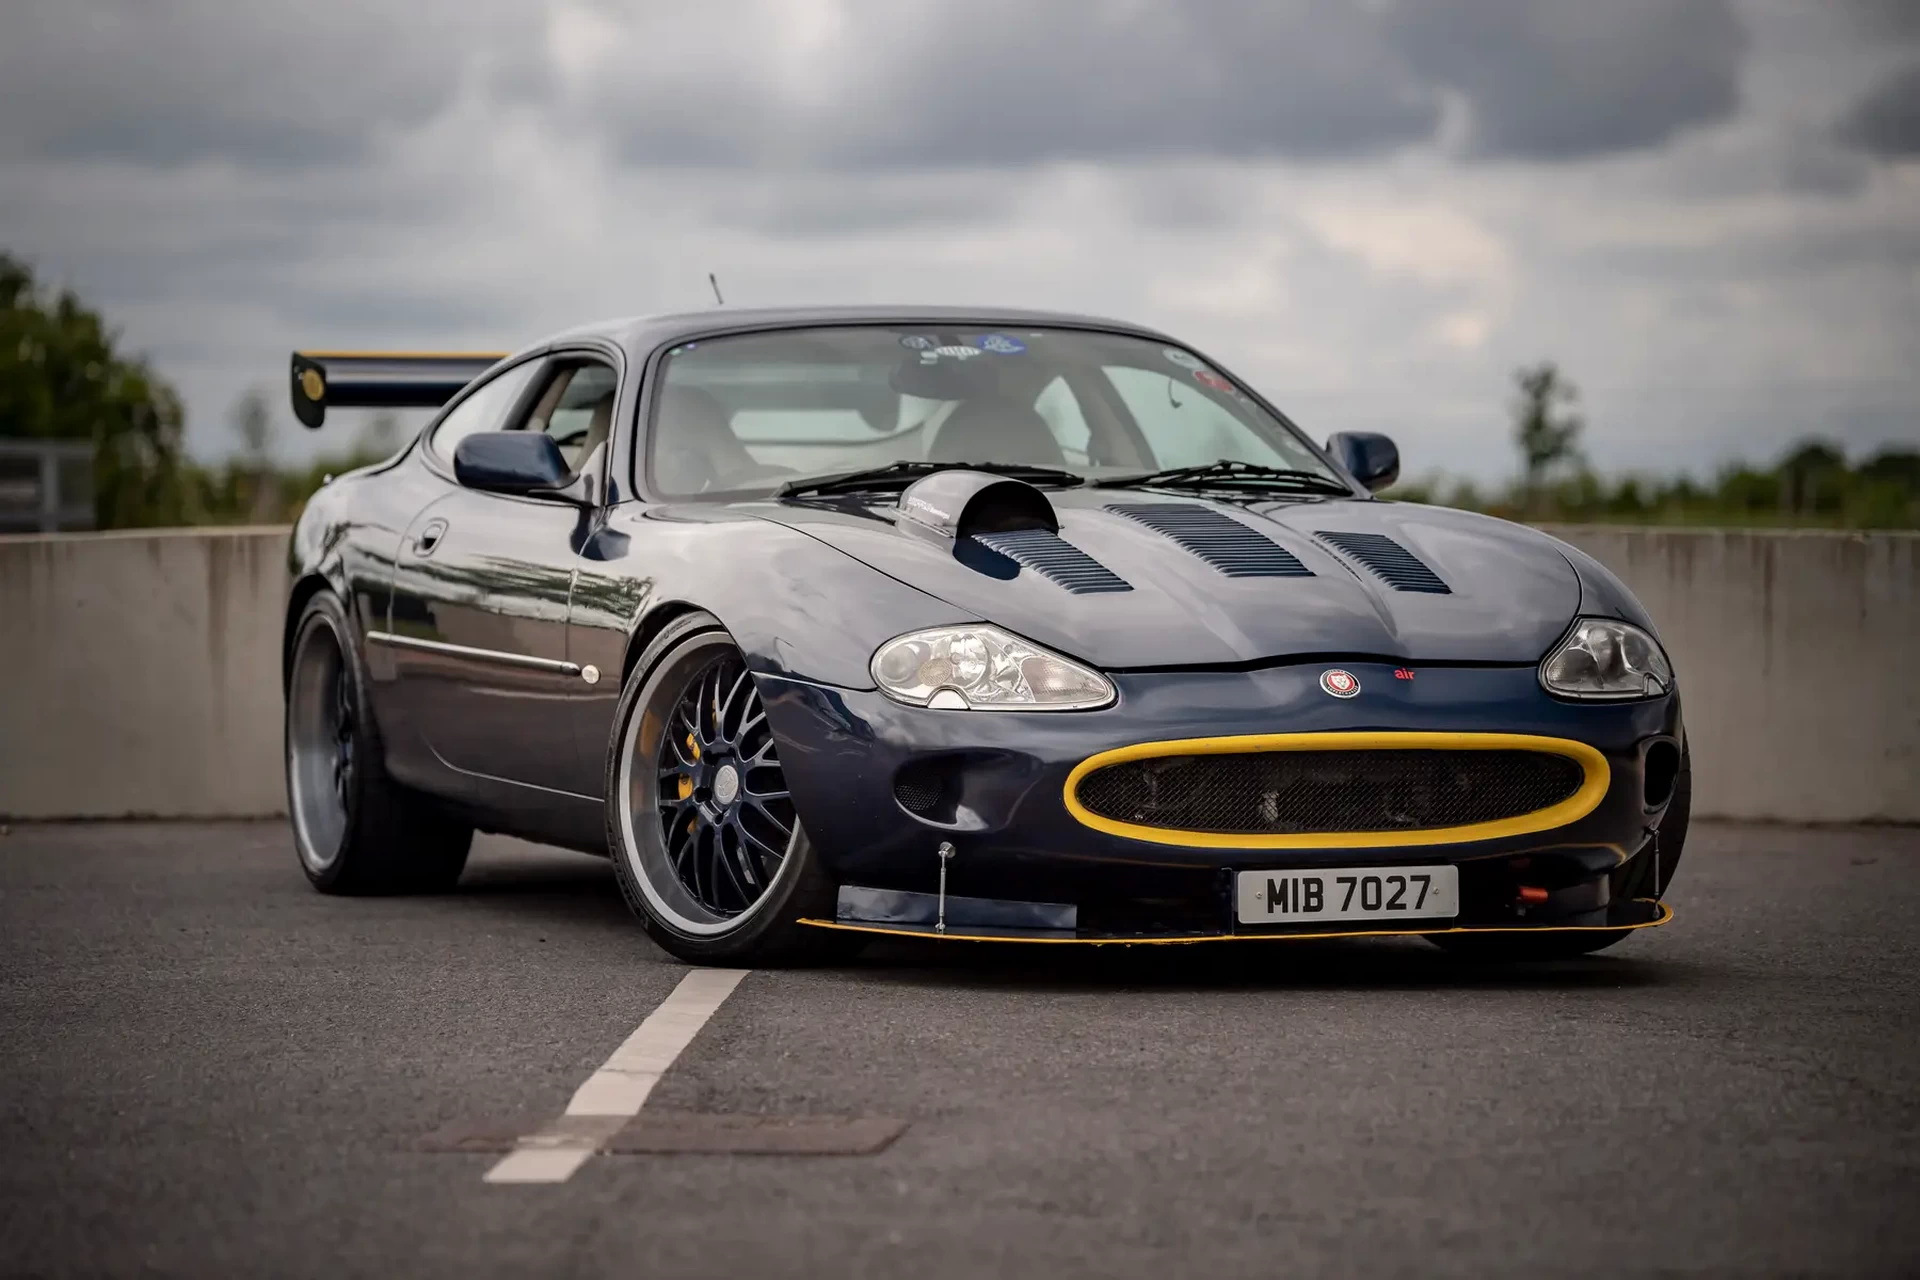 Manual-Swapped 632 HP Jaguar XKR “Badcat” Looks Ready To Hit The Racetrack  | Carscoops